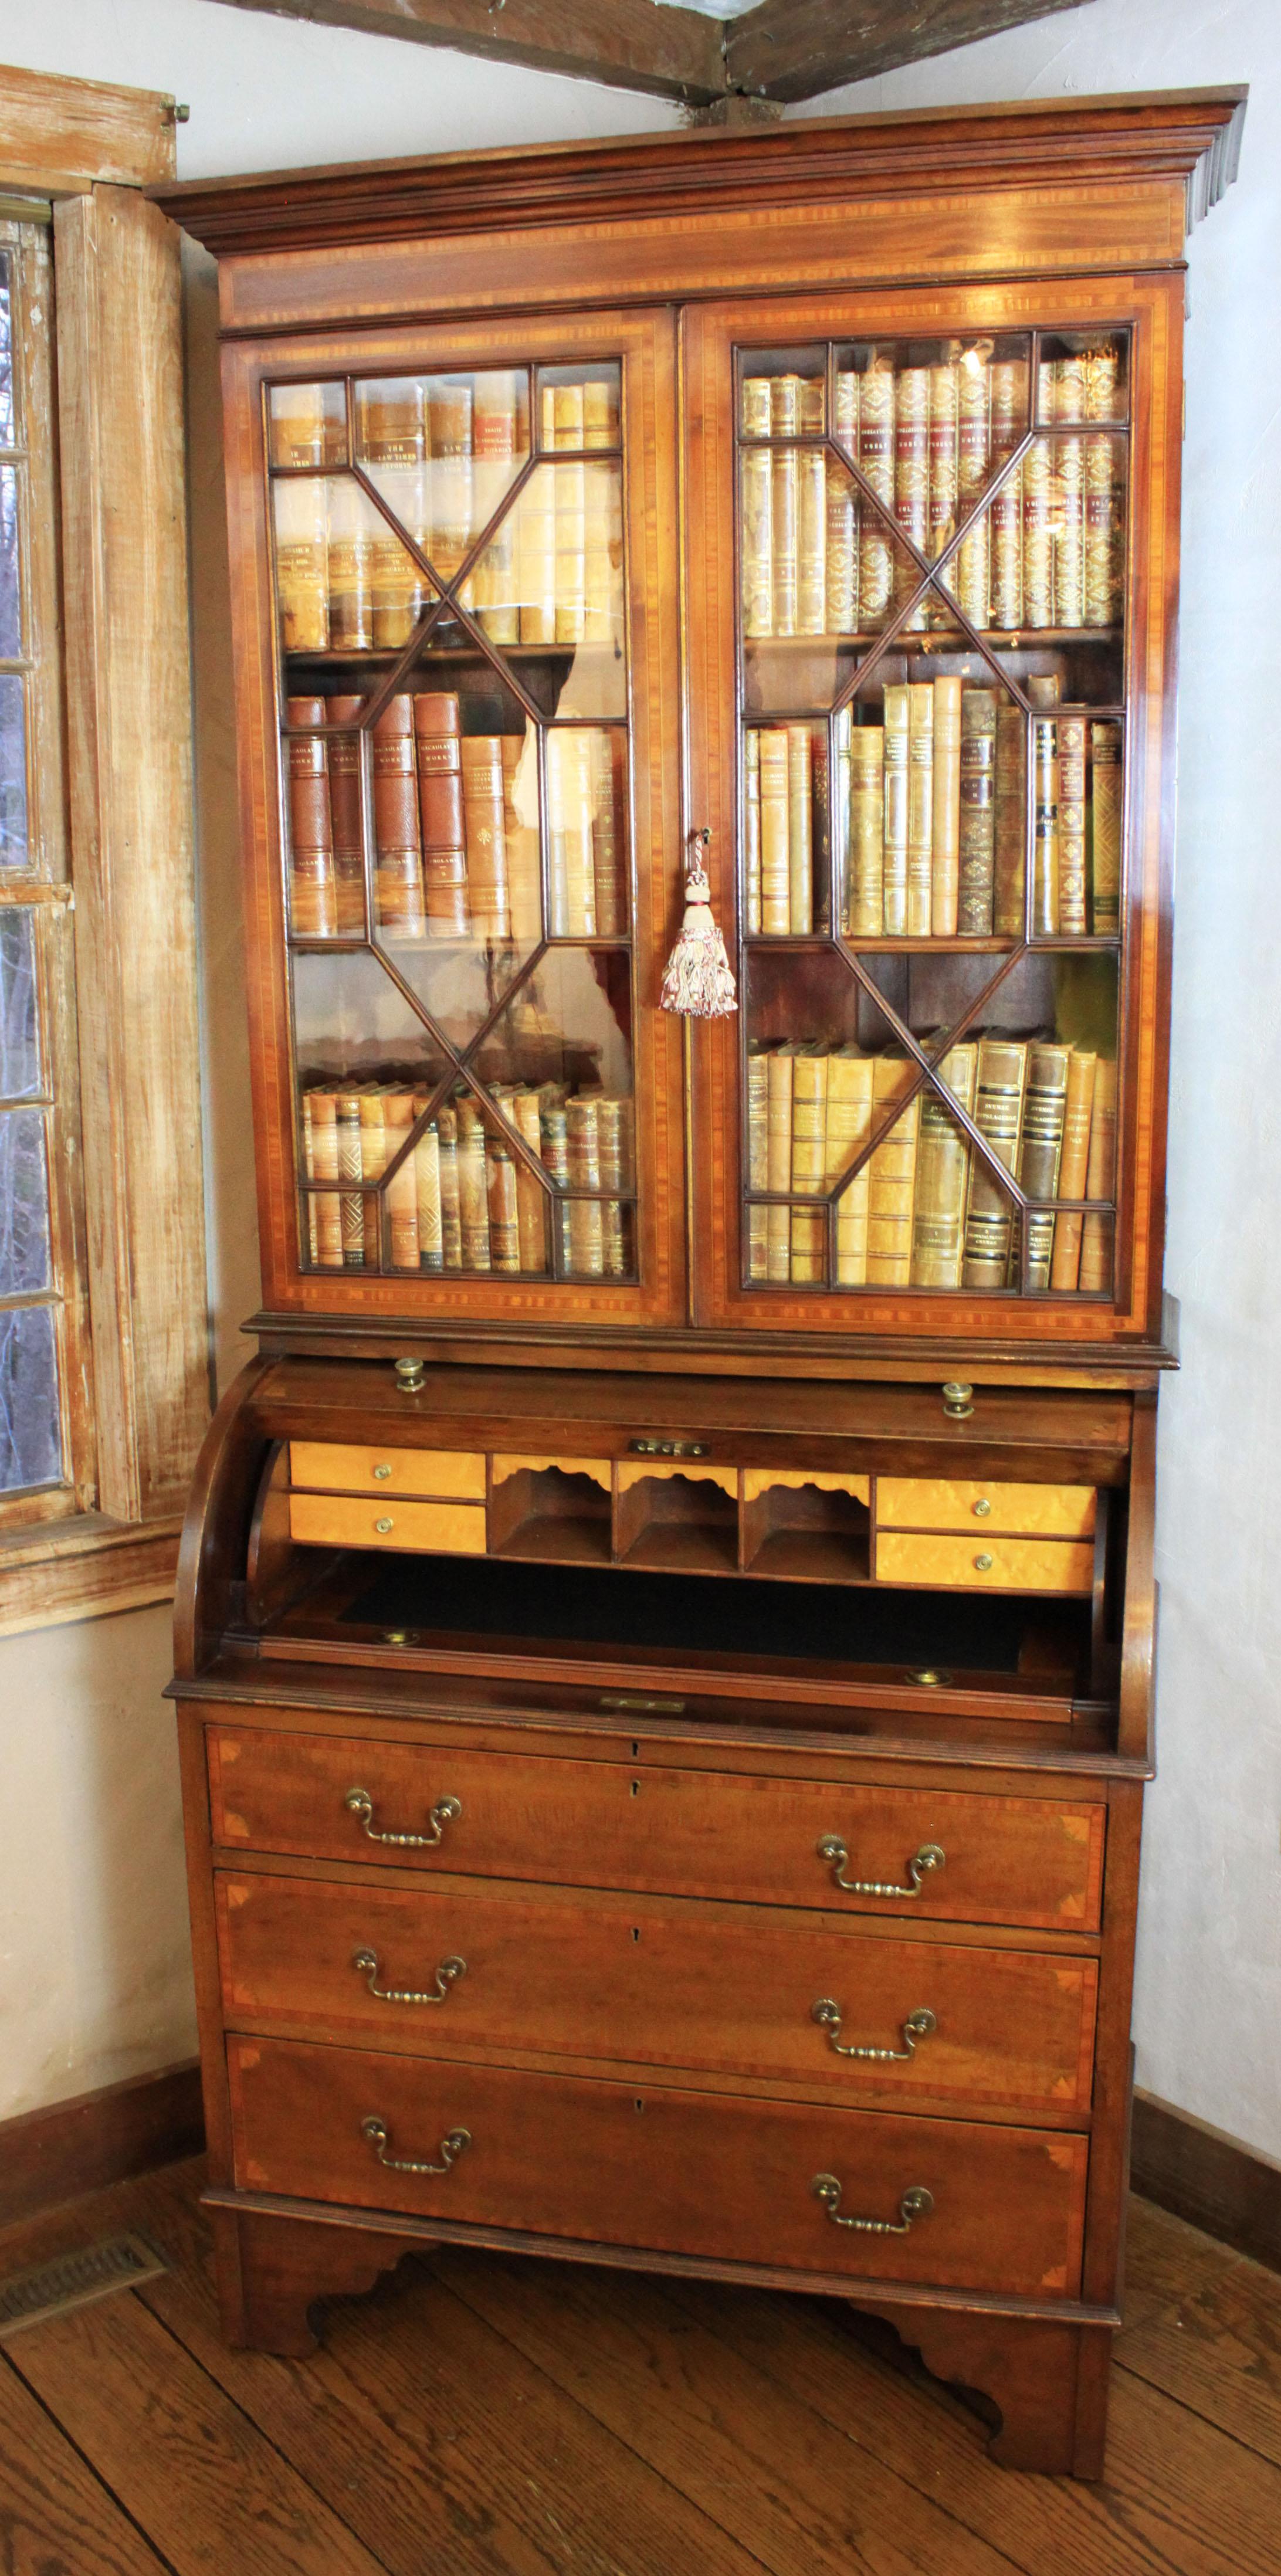 Inlaid Edwardian mahogany cylinder desk bookcase/secretary inlaid with satinwood, ebony and boxwood. Lower desk also includes fan inlays of satinwood and olive wood in the four corners of the cylinder fall and the three drawers. Interior features